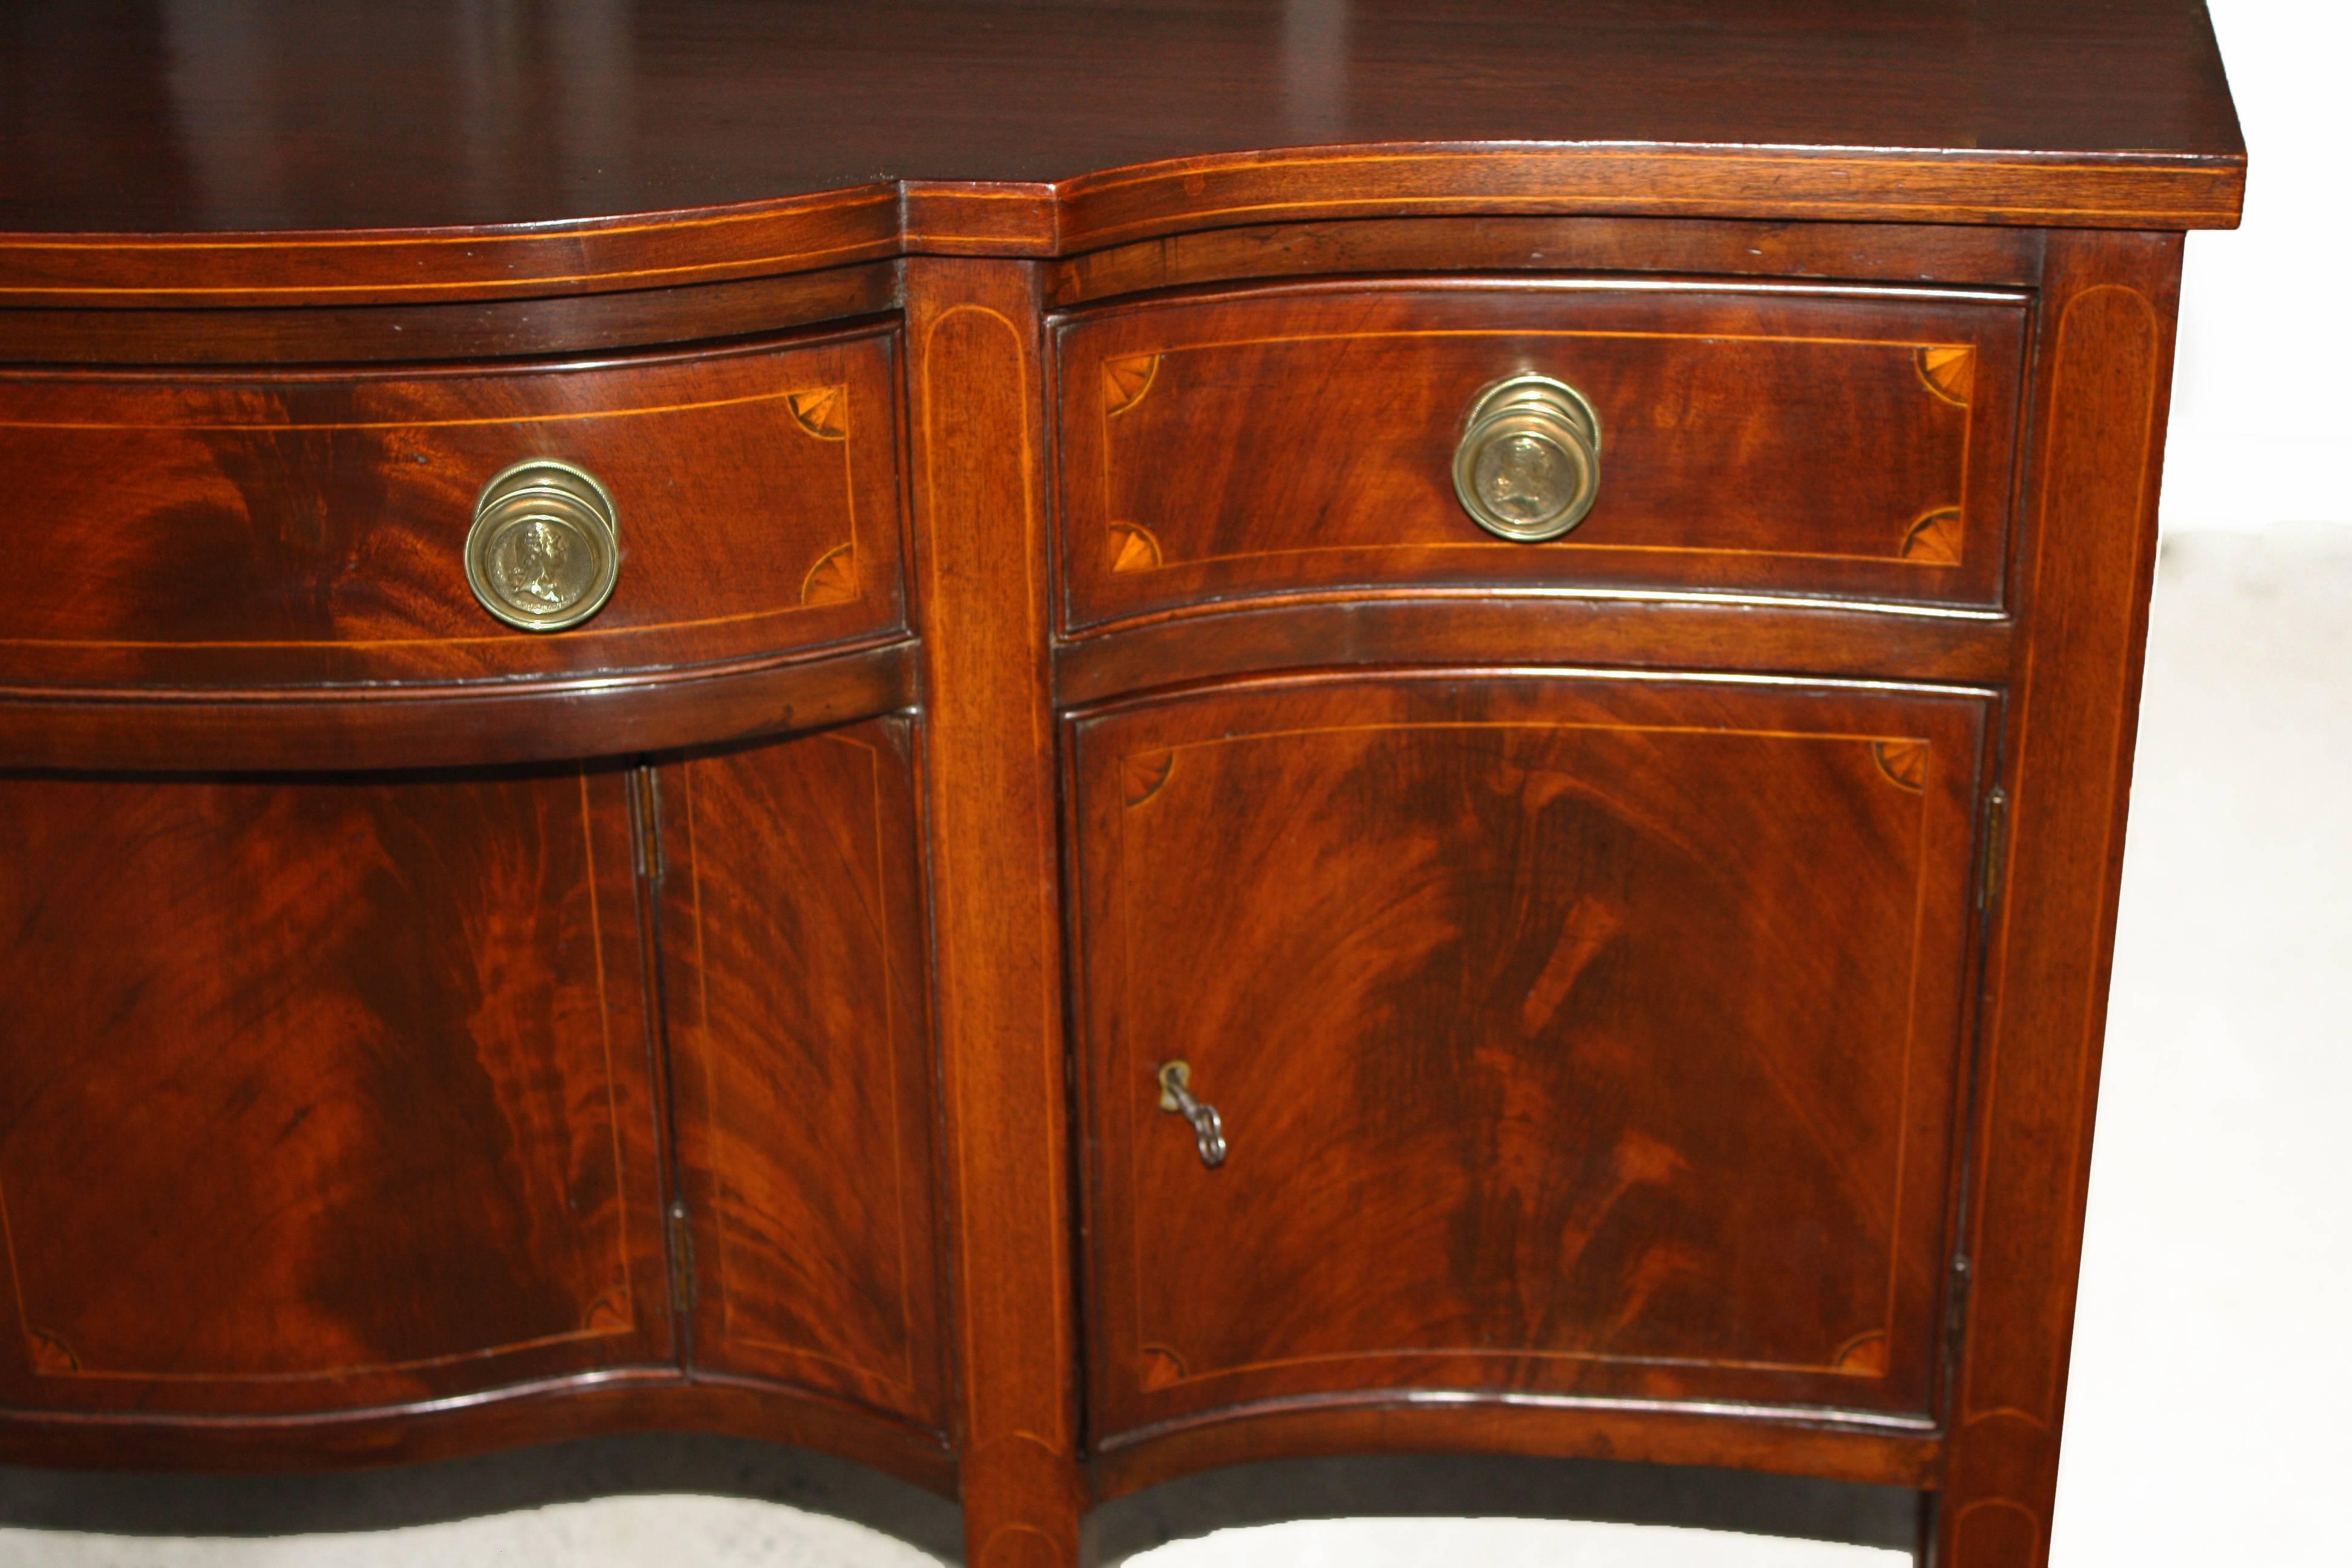 American Federal Sideboard with George Washington Commemorative Brasses 1